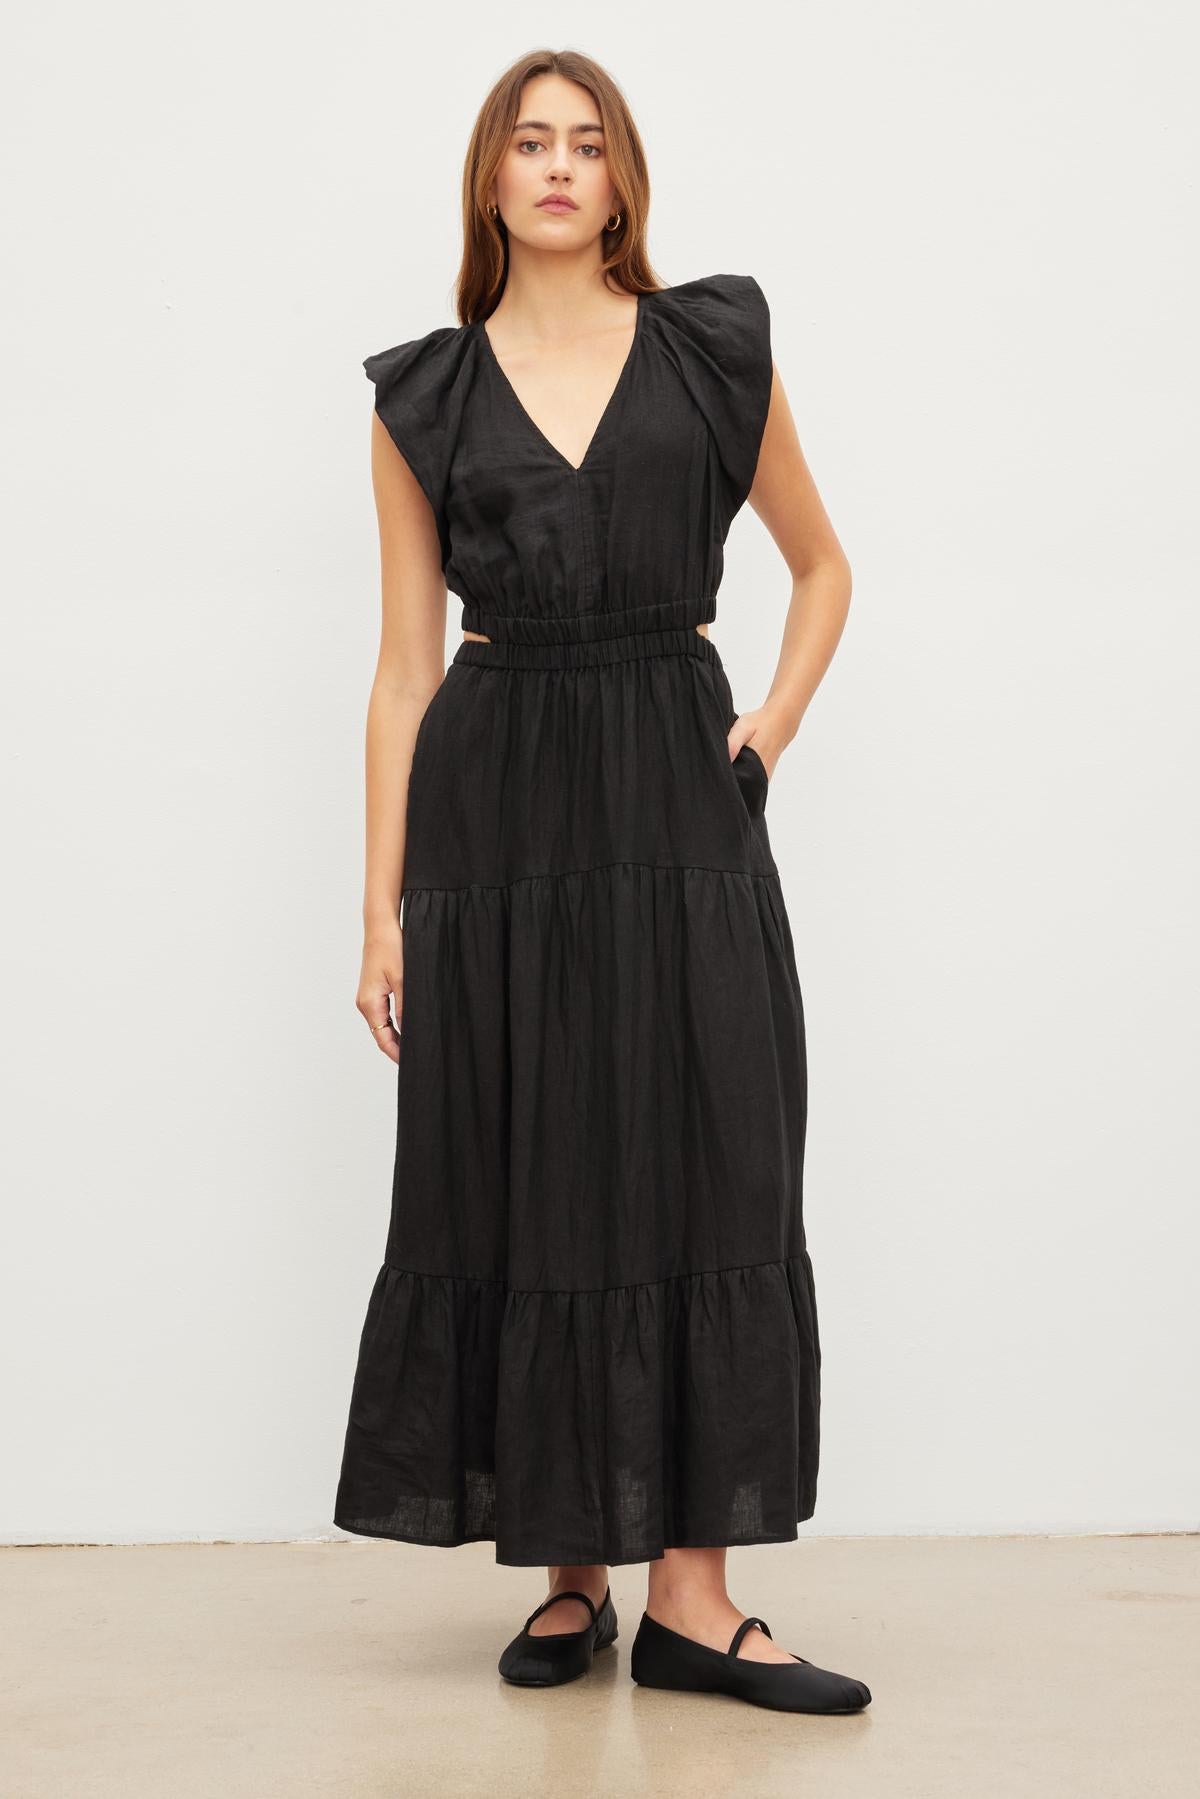 A woman stands against a plain background wearing the GINGER LINEN DRESS by Velvet by Graham & Spencer, which is a black breathable linen dress with a v-neckline and tiered skirt. She has her left hand in her pocket and is wearing black shoes.-35982607286465